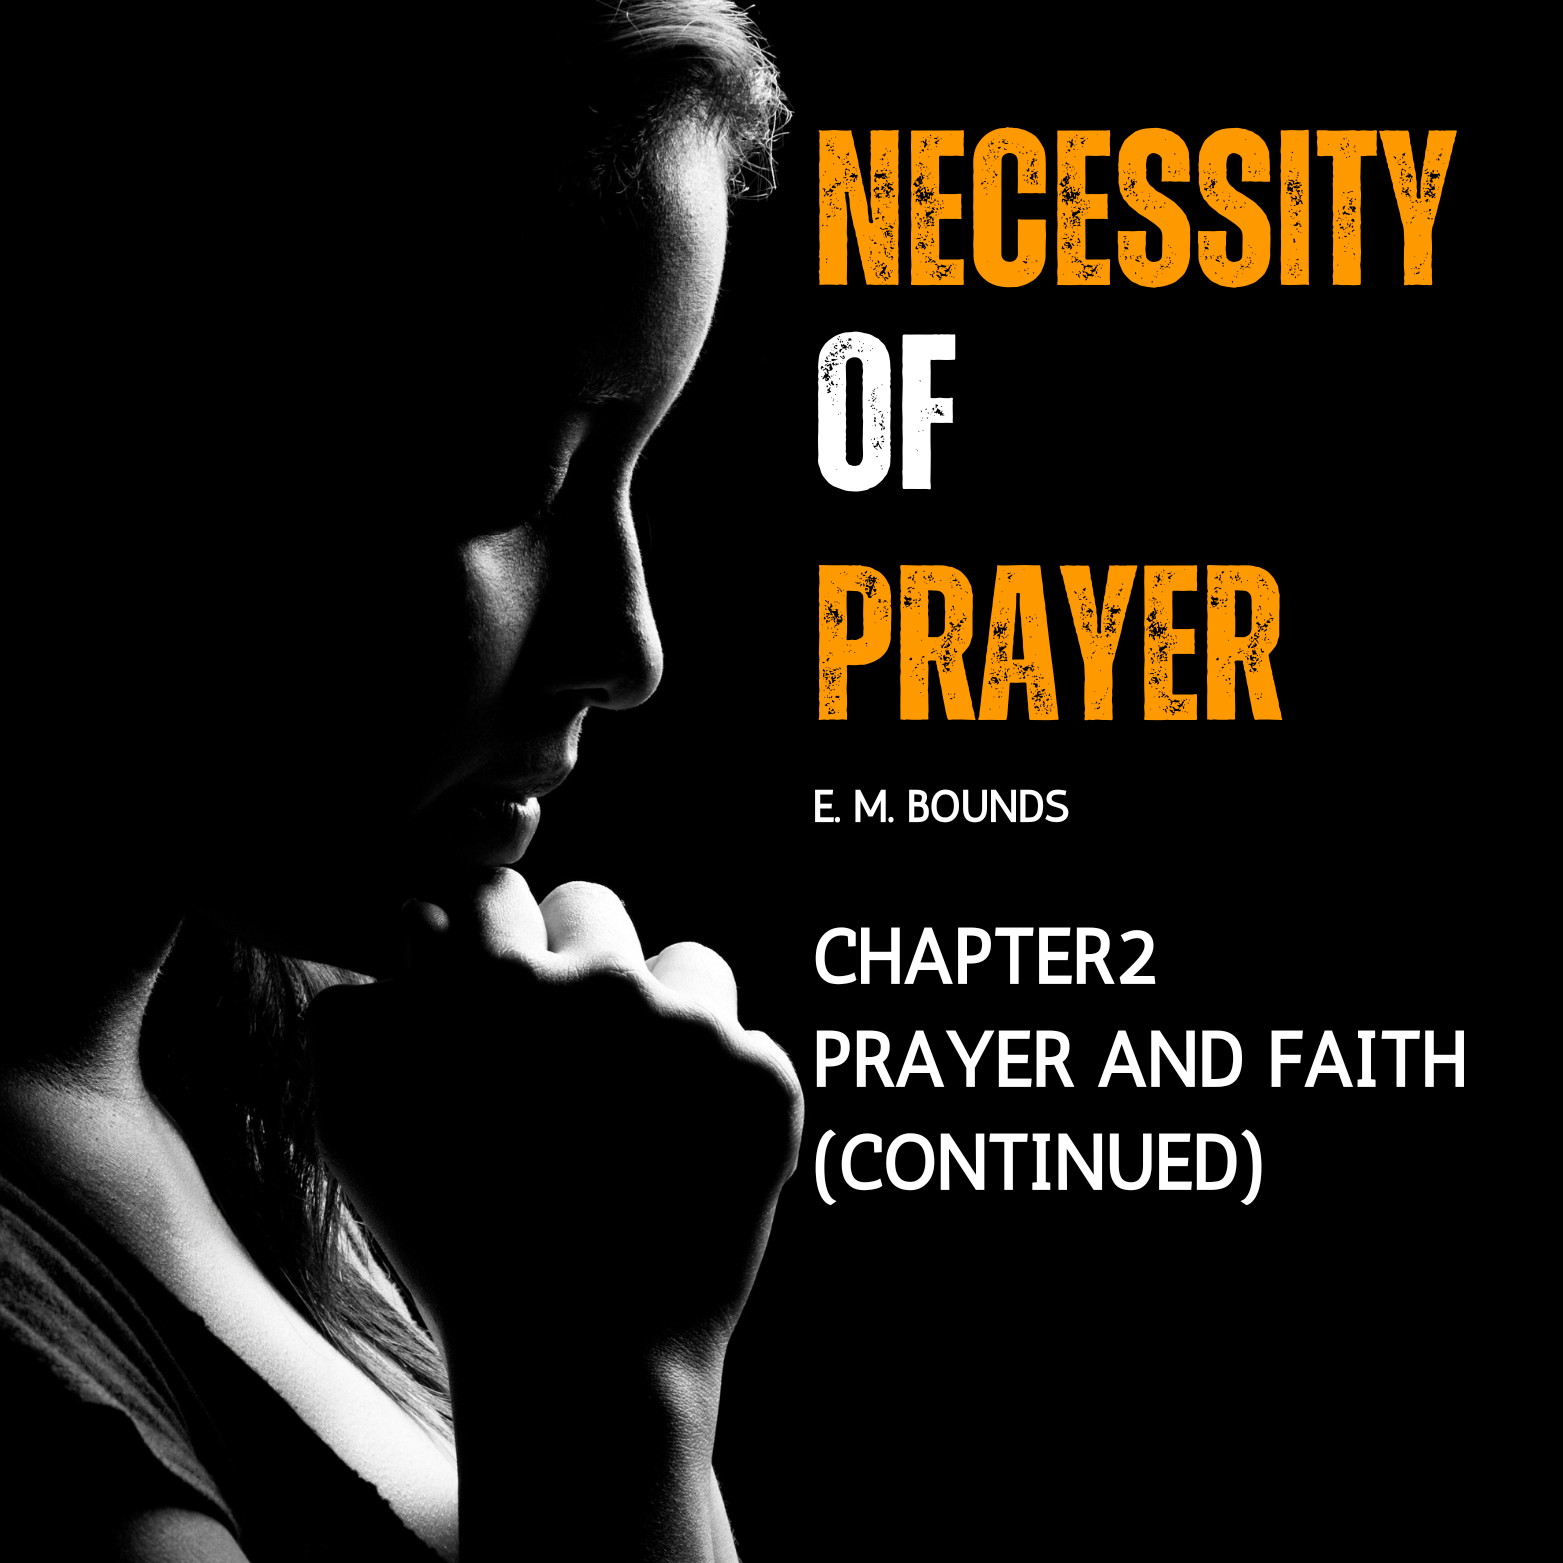 The Necessity of Prayer – Chapter 2